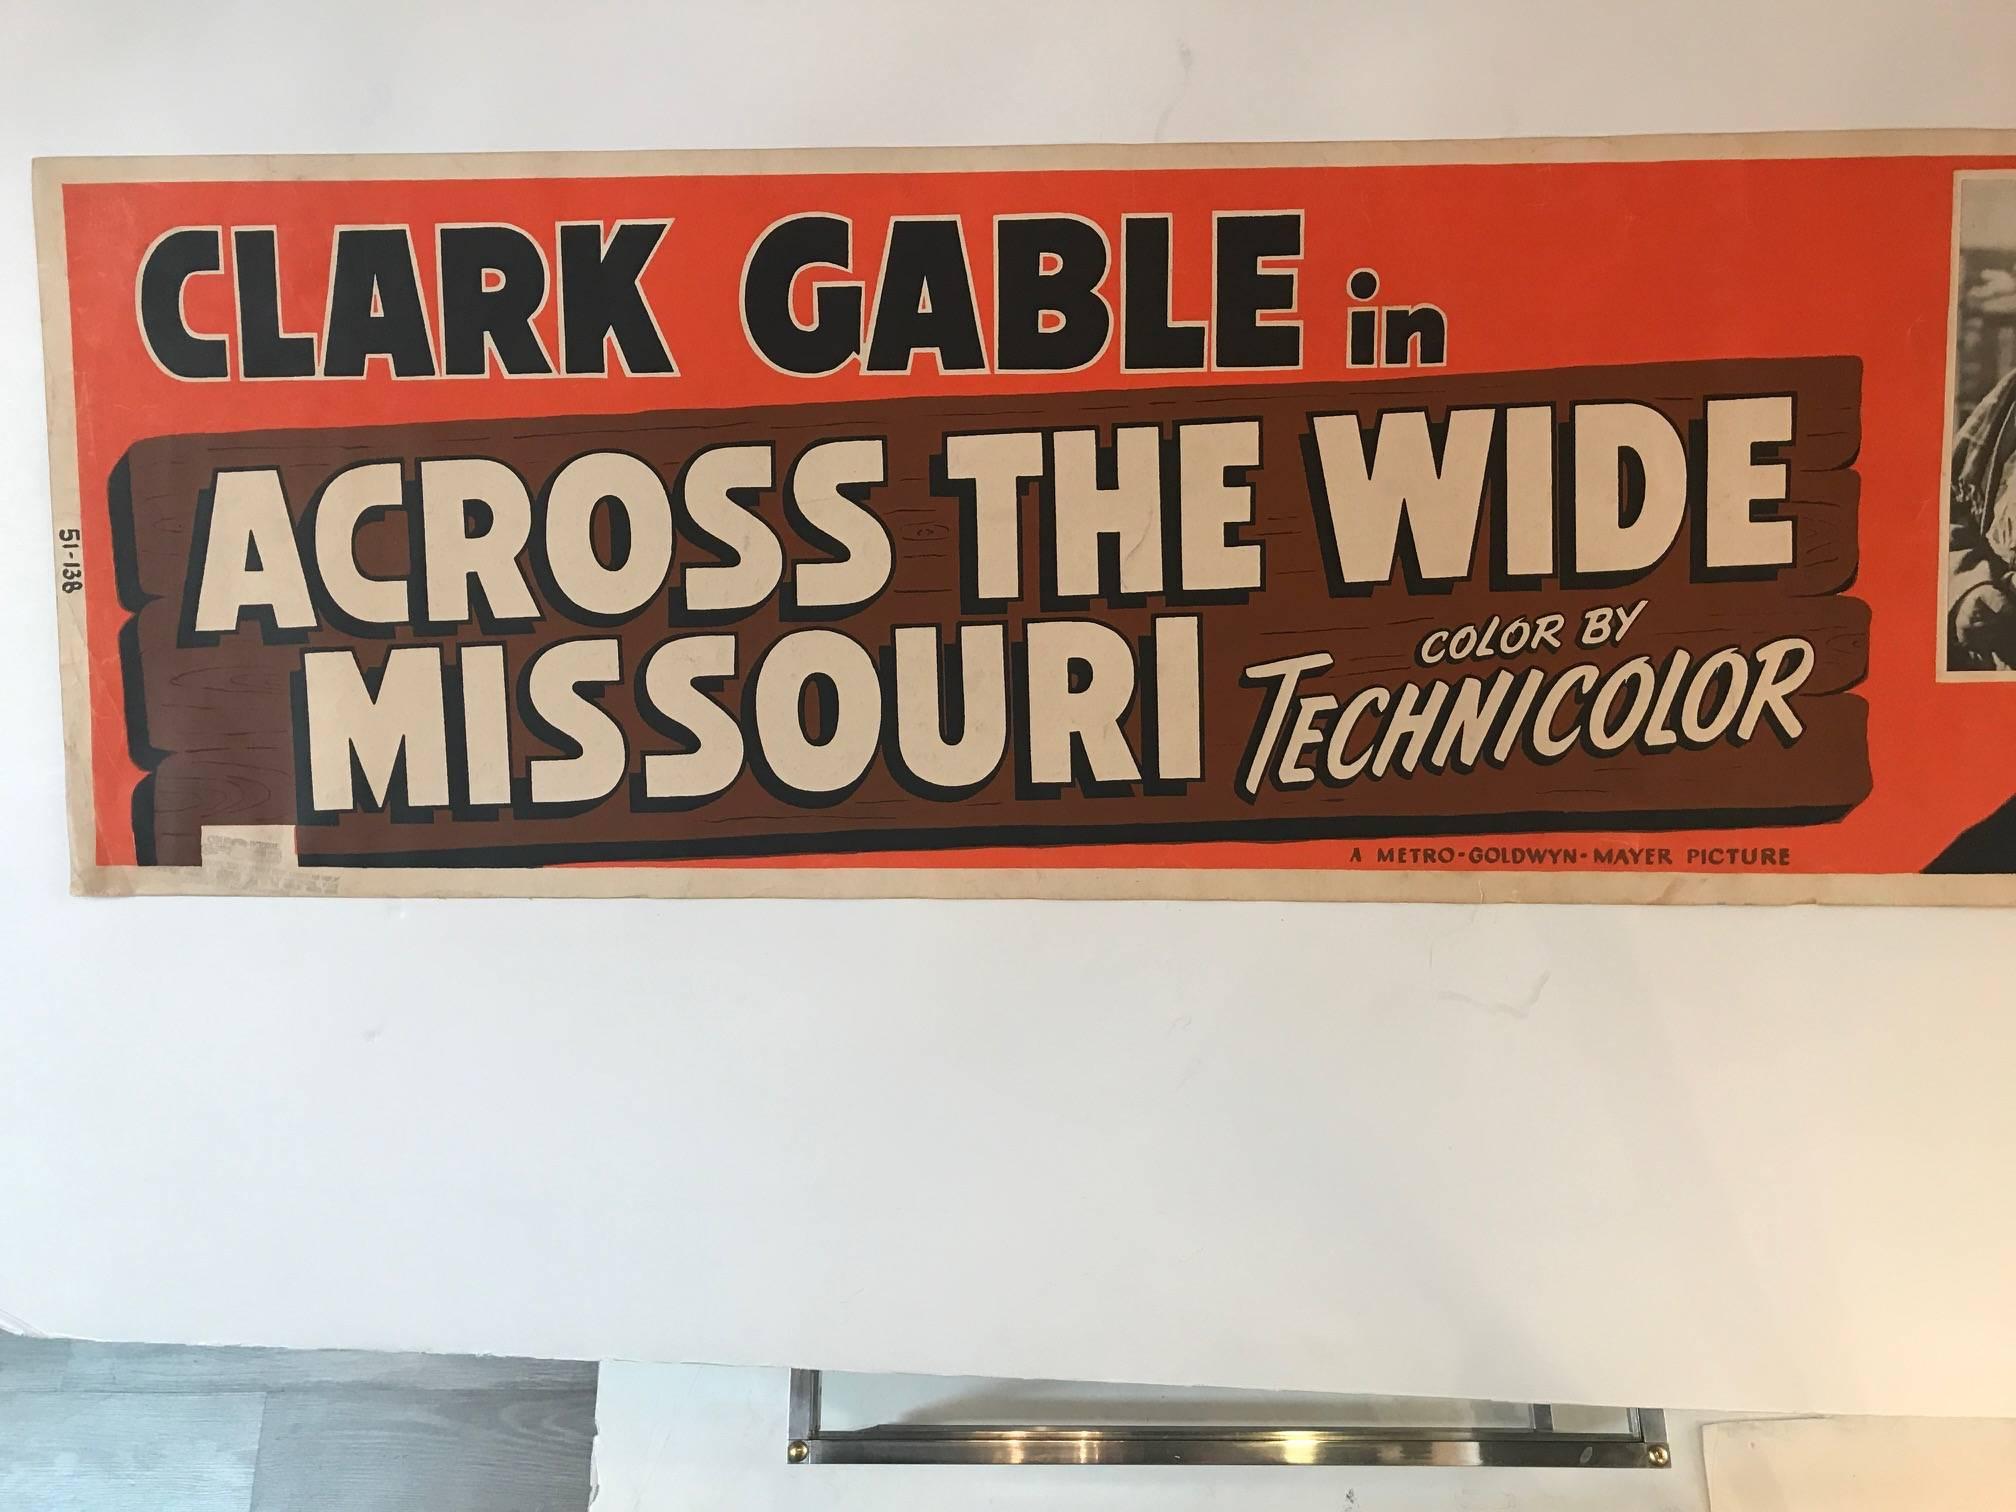 The movie poster titled Across The Wide Missouri. A rare example in the extremely rare marque layout. Very good to excellent condition, minor wear to bottom, never taped or rolled or folded, always stored in a flat position. Stamped with the Loews